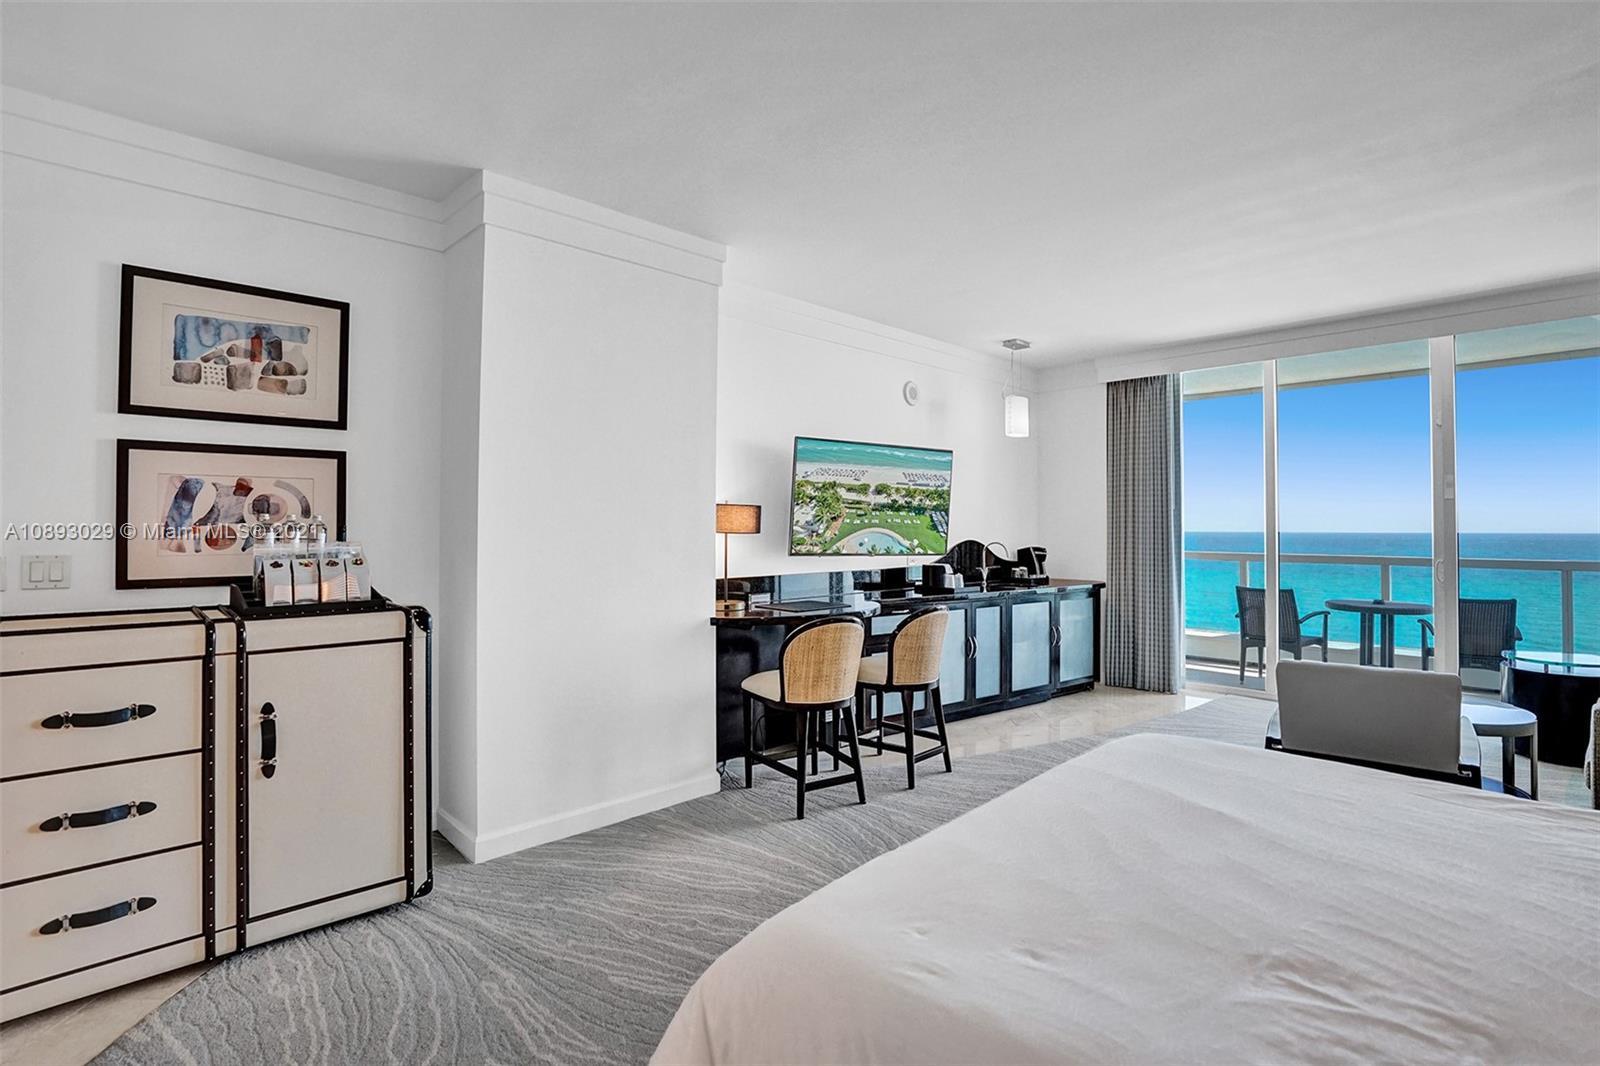 Beautiful Jr Suite w/ direct ocean & pool views at The Fontainebleau III. Enjoy full service, vacati